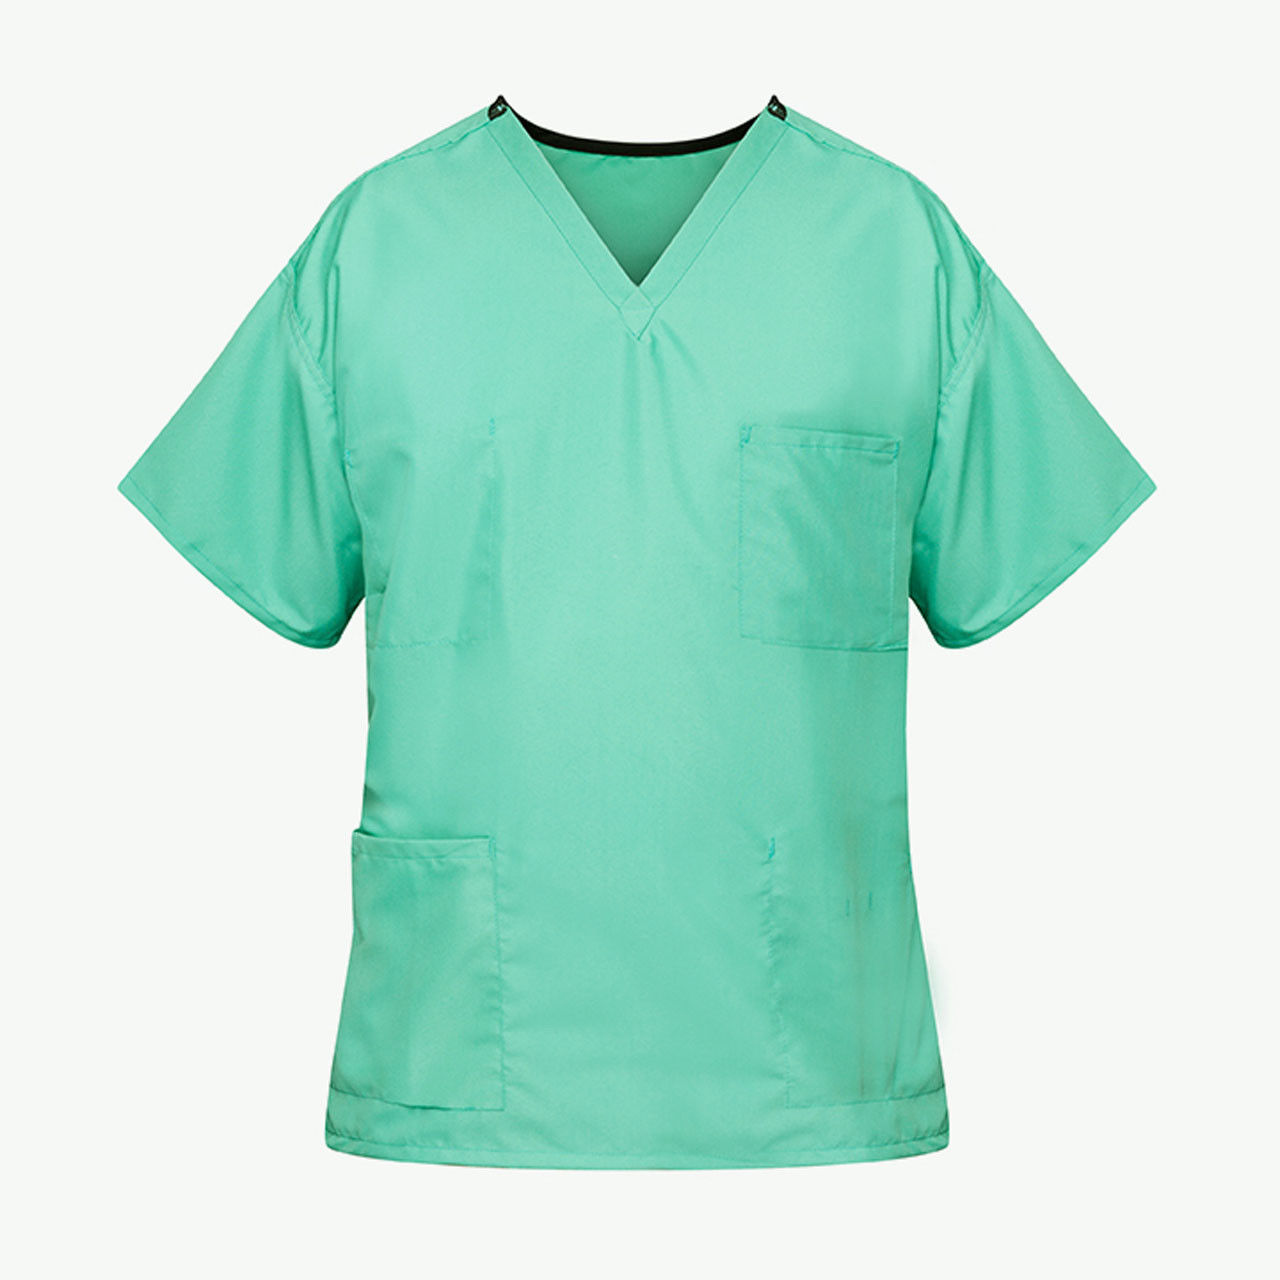 Are jade green scrub pants available to match the Unisex Reversible Scrub Top?